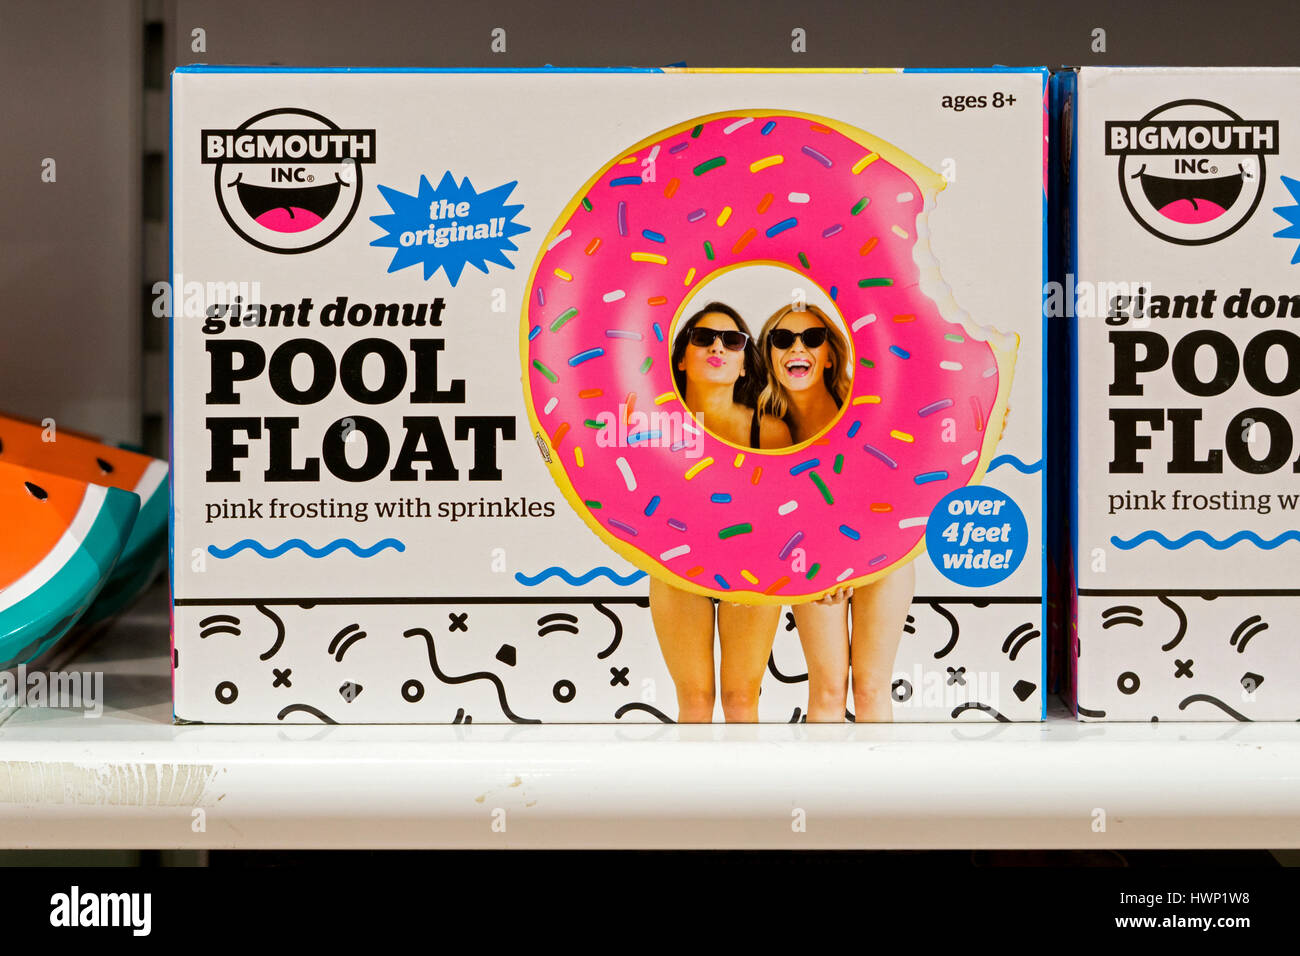 A giant donut shaped pool float for sale at It'sugar, a candy and novelty shop on Broadway in Greenwich Village, New York City Stock Photo